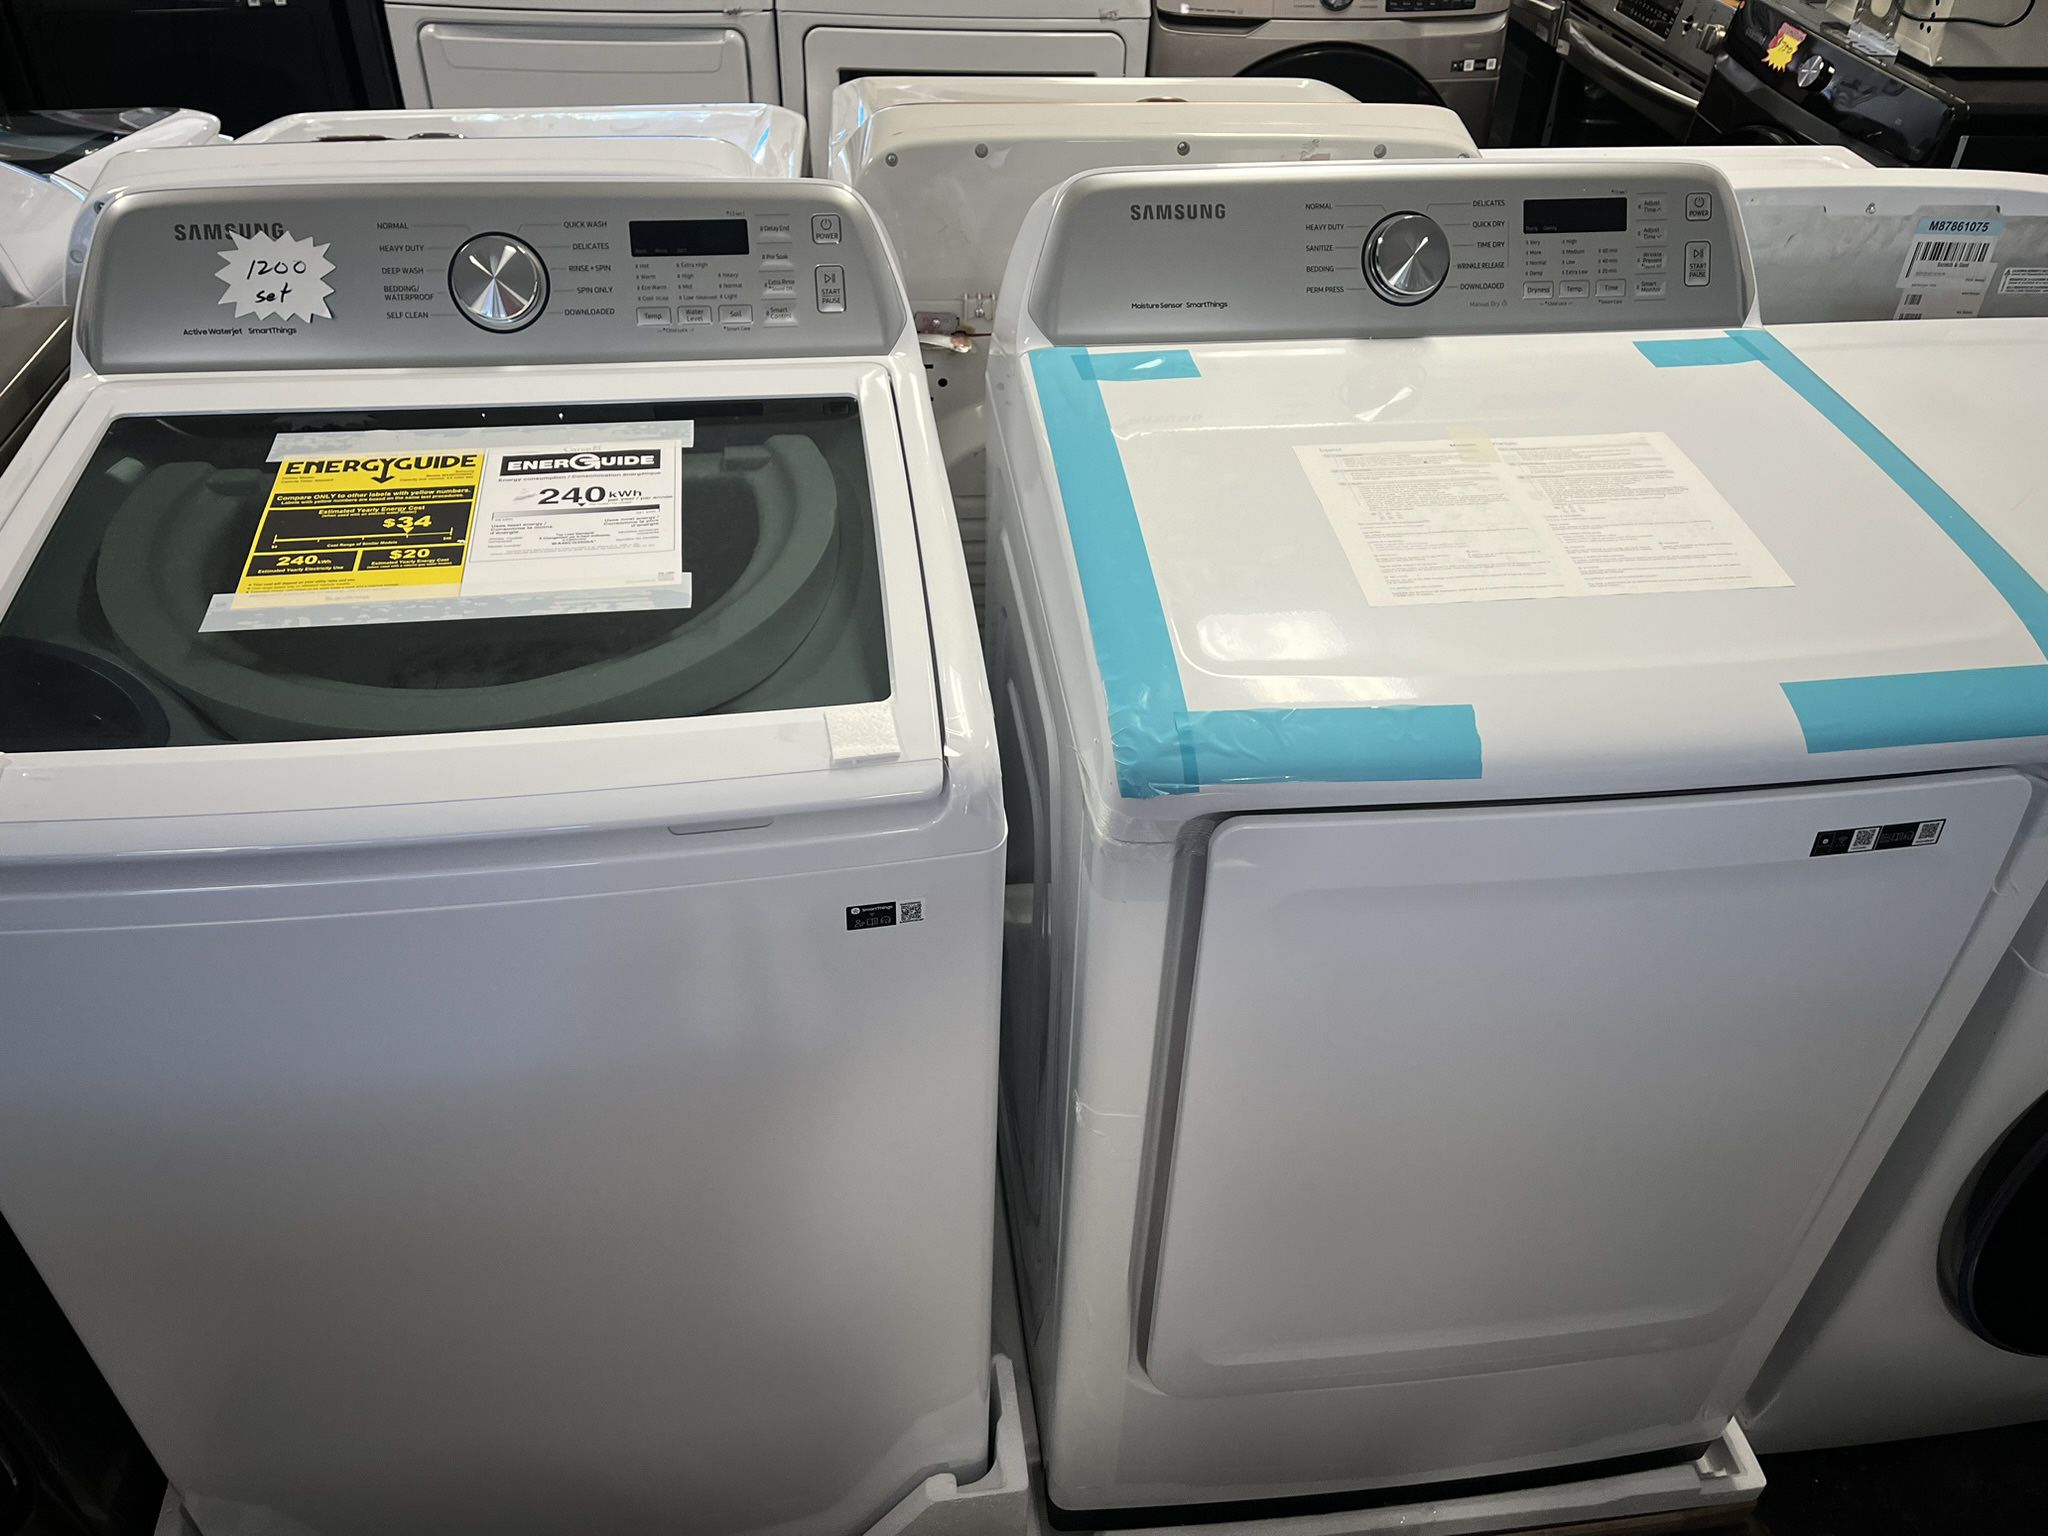 🚩🚩🚩 Sale!!! New Samsung Washer Dryer Set Top Loaders Washer With Agitator 🚩🚩